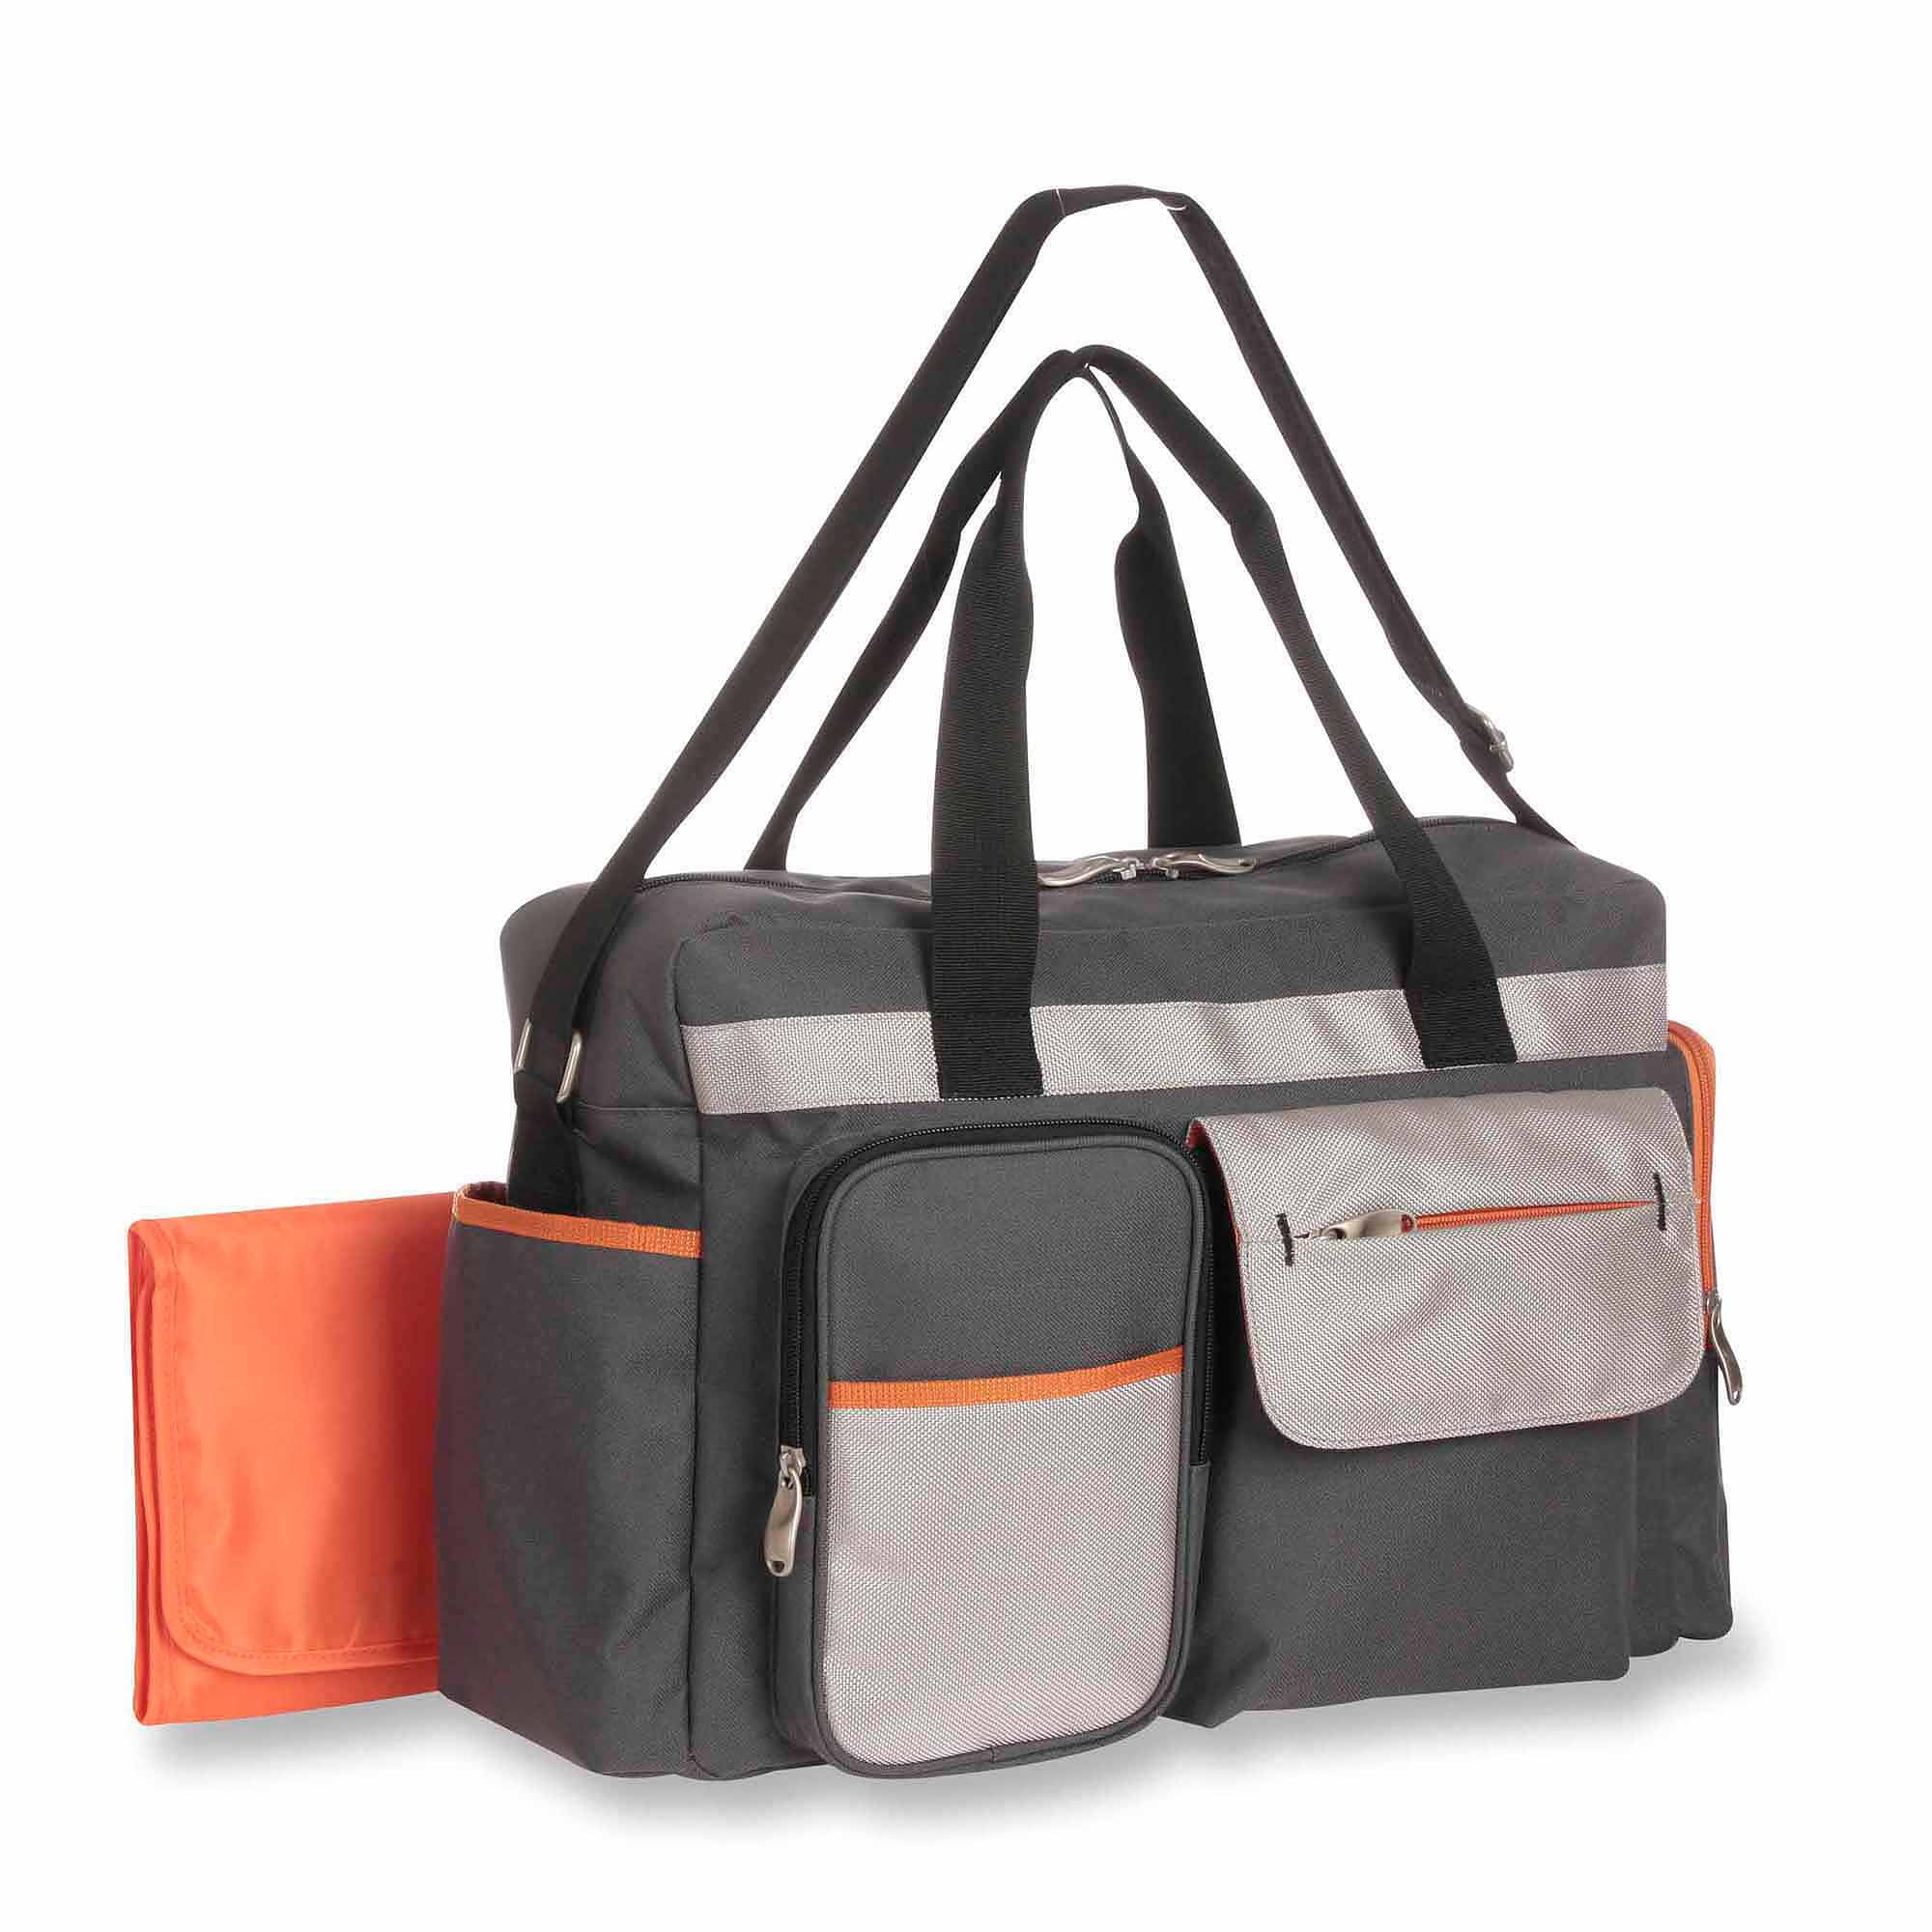 Baby Boom Flap Messenger Diaper Bag with Quick Find System - Grey Print - www.paulmartinsmith.com